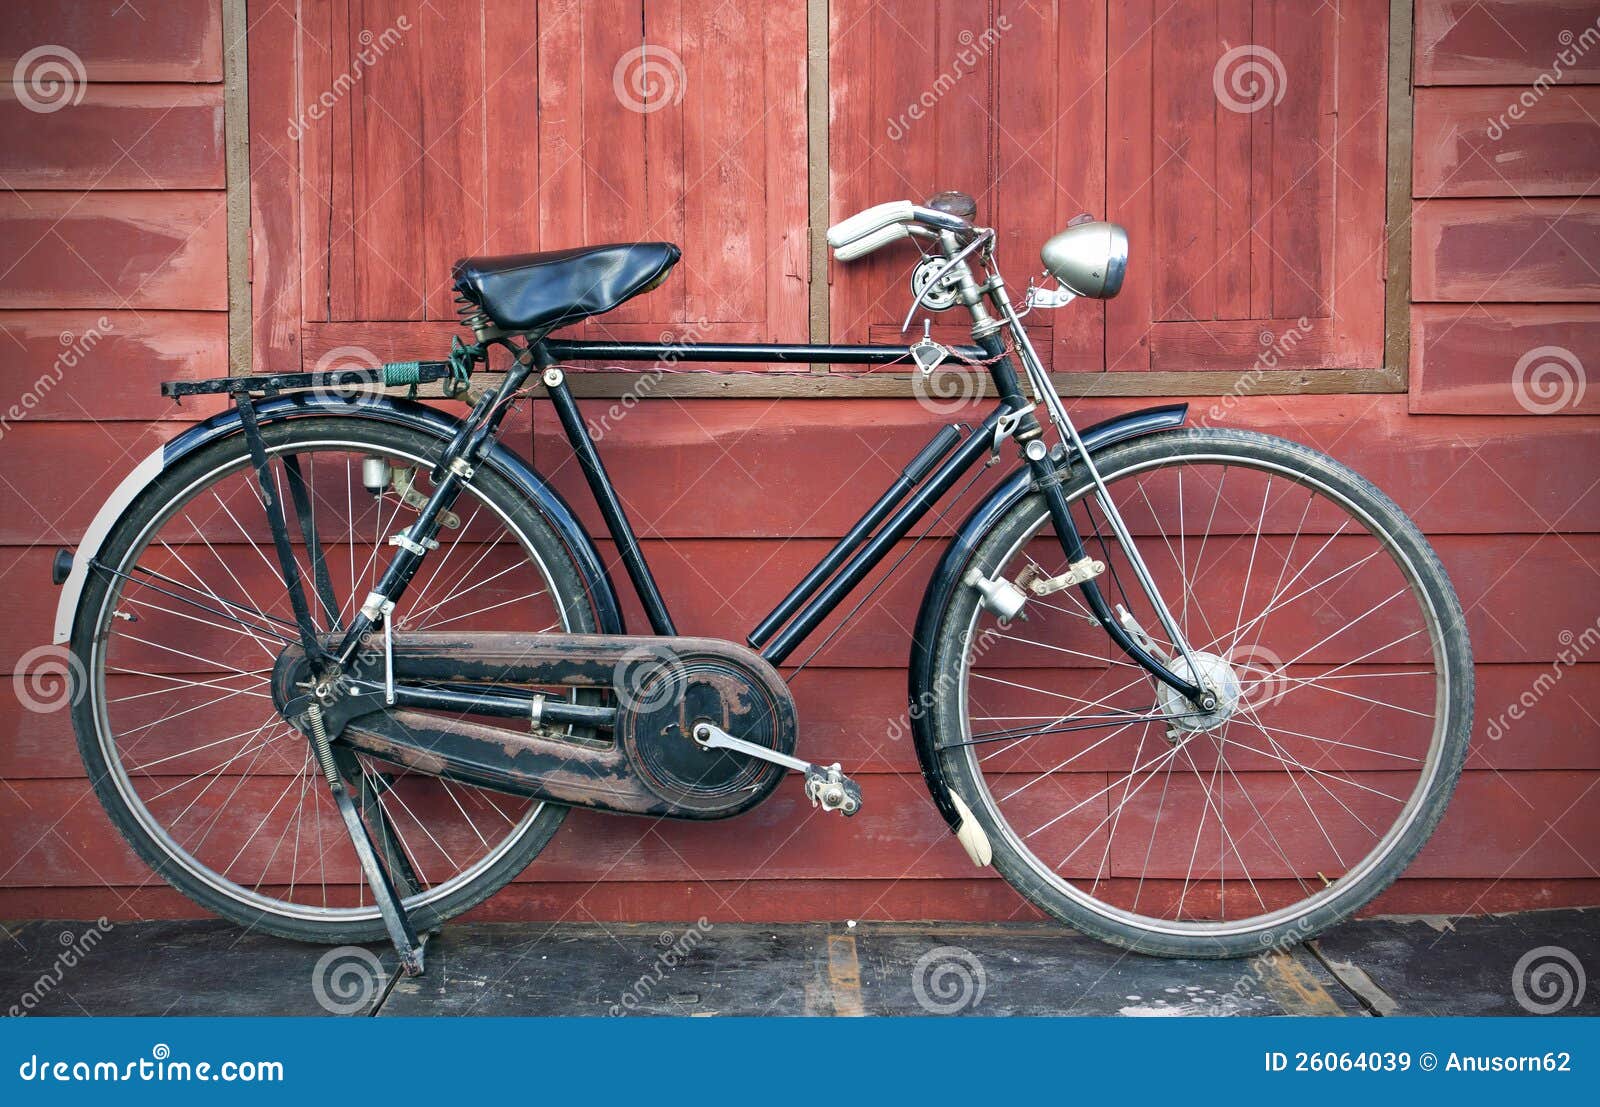 bicyclette anglaise prix